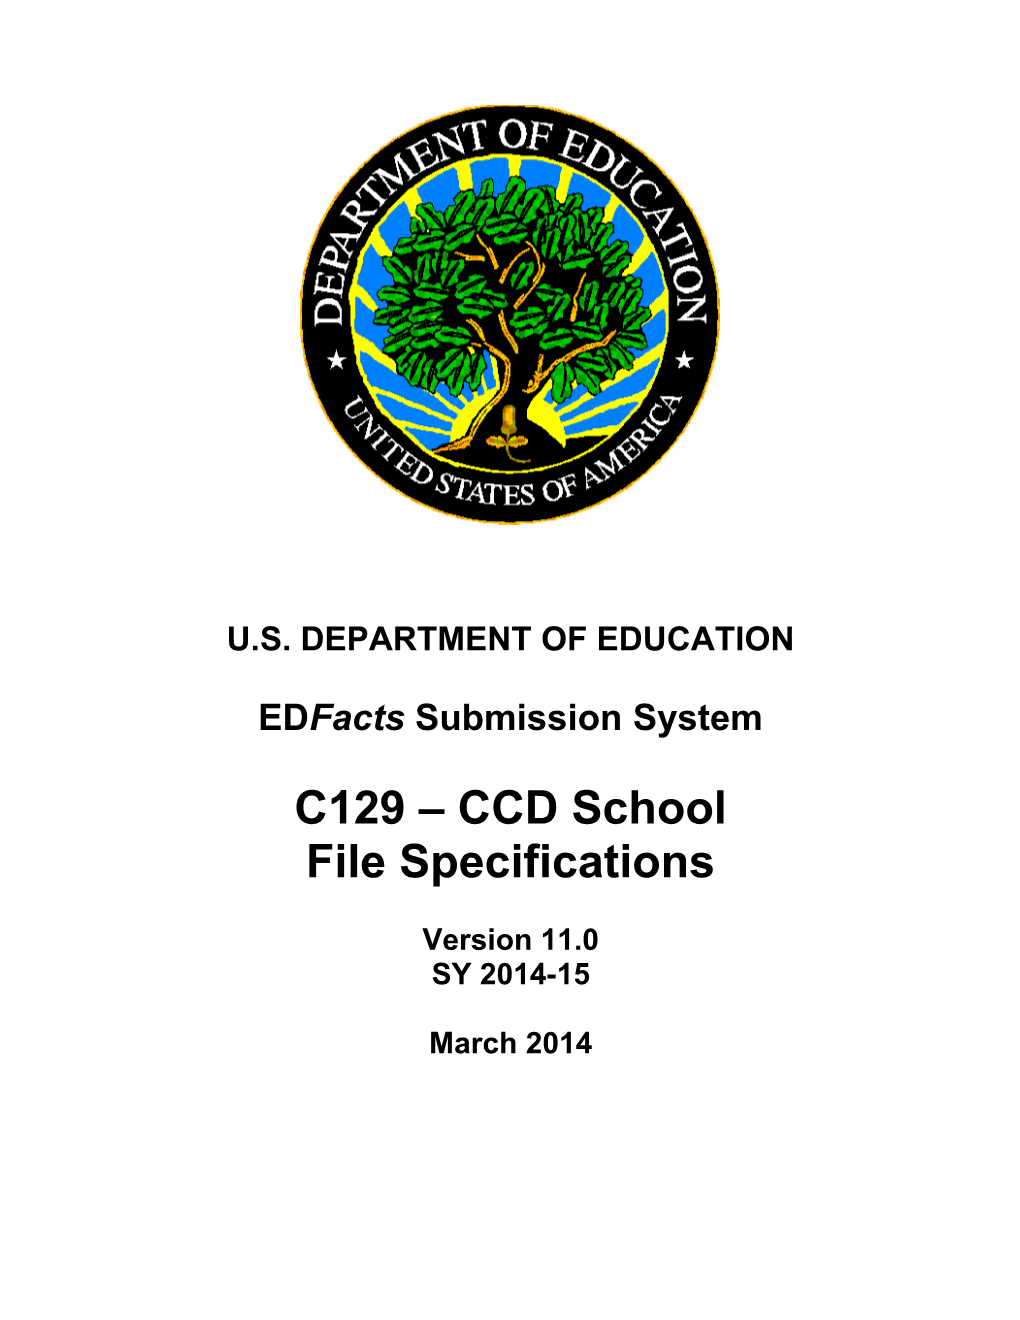 CCD School File Specifications s1